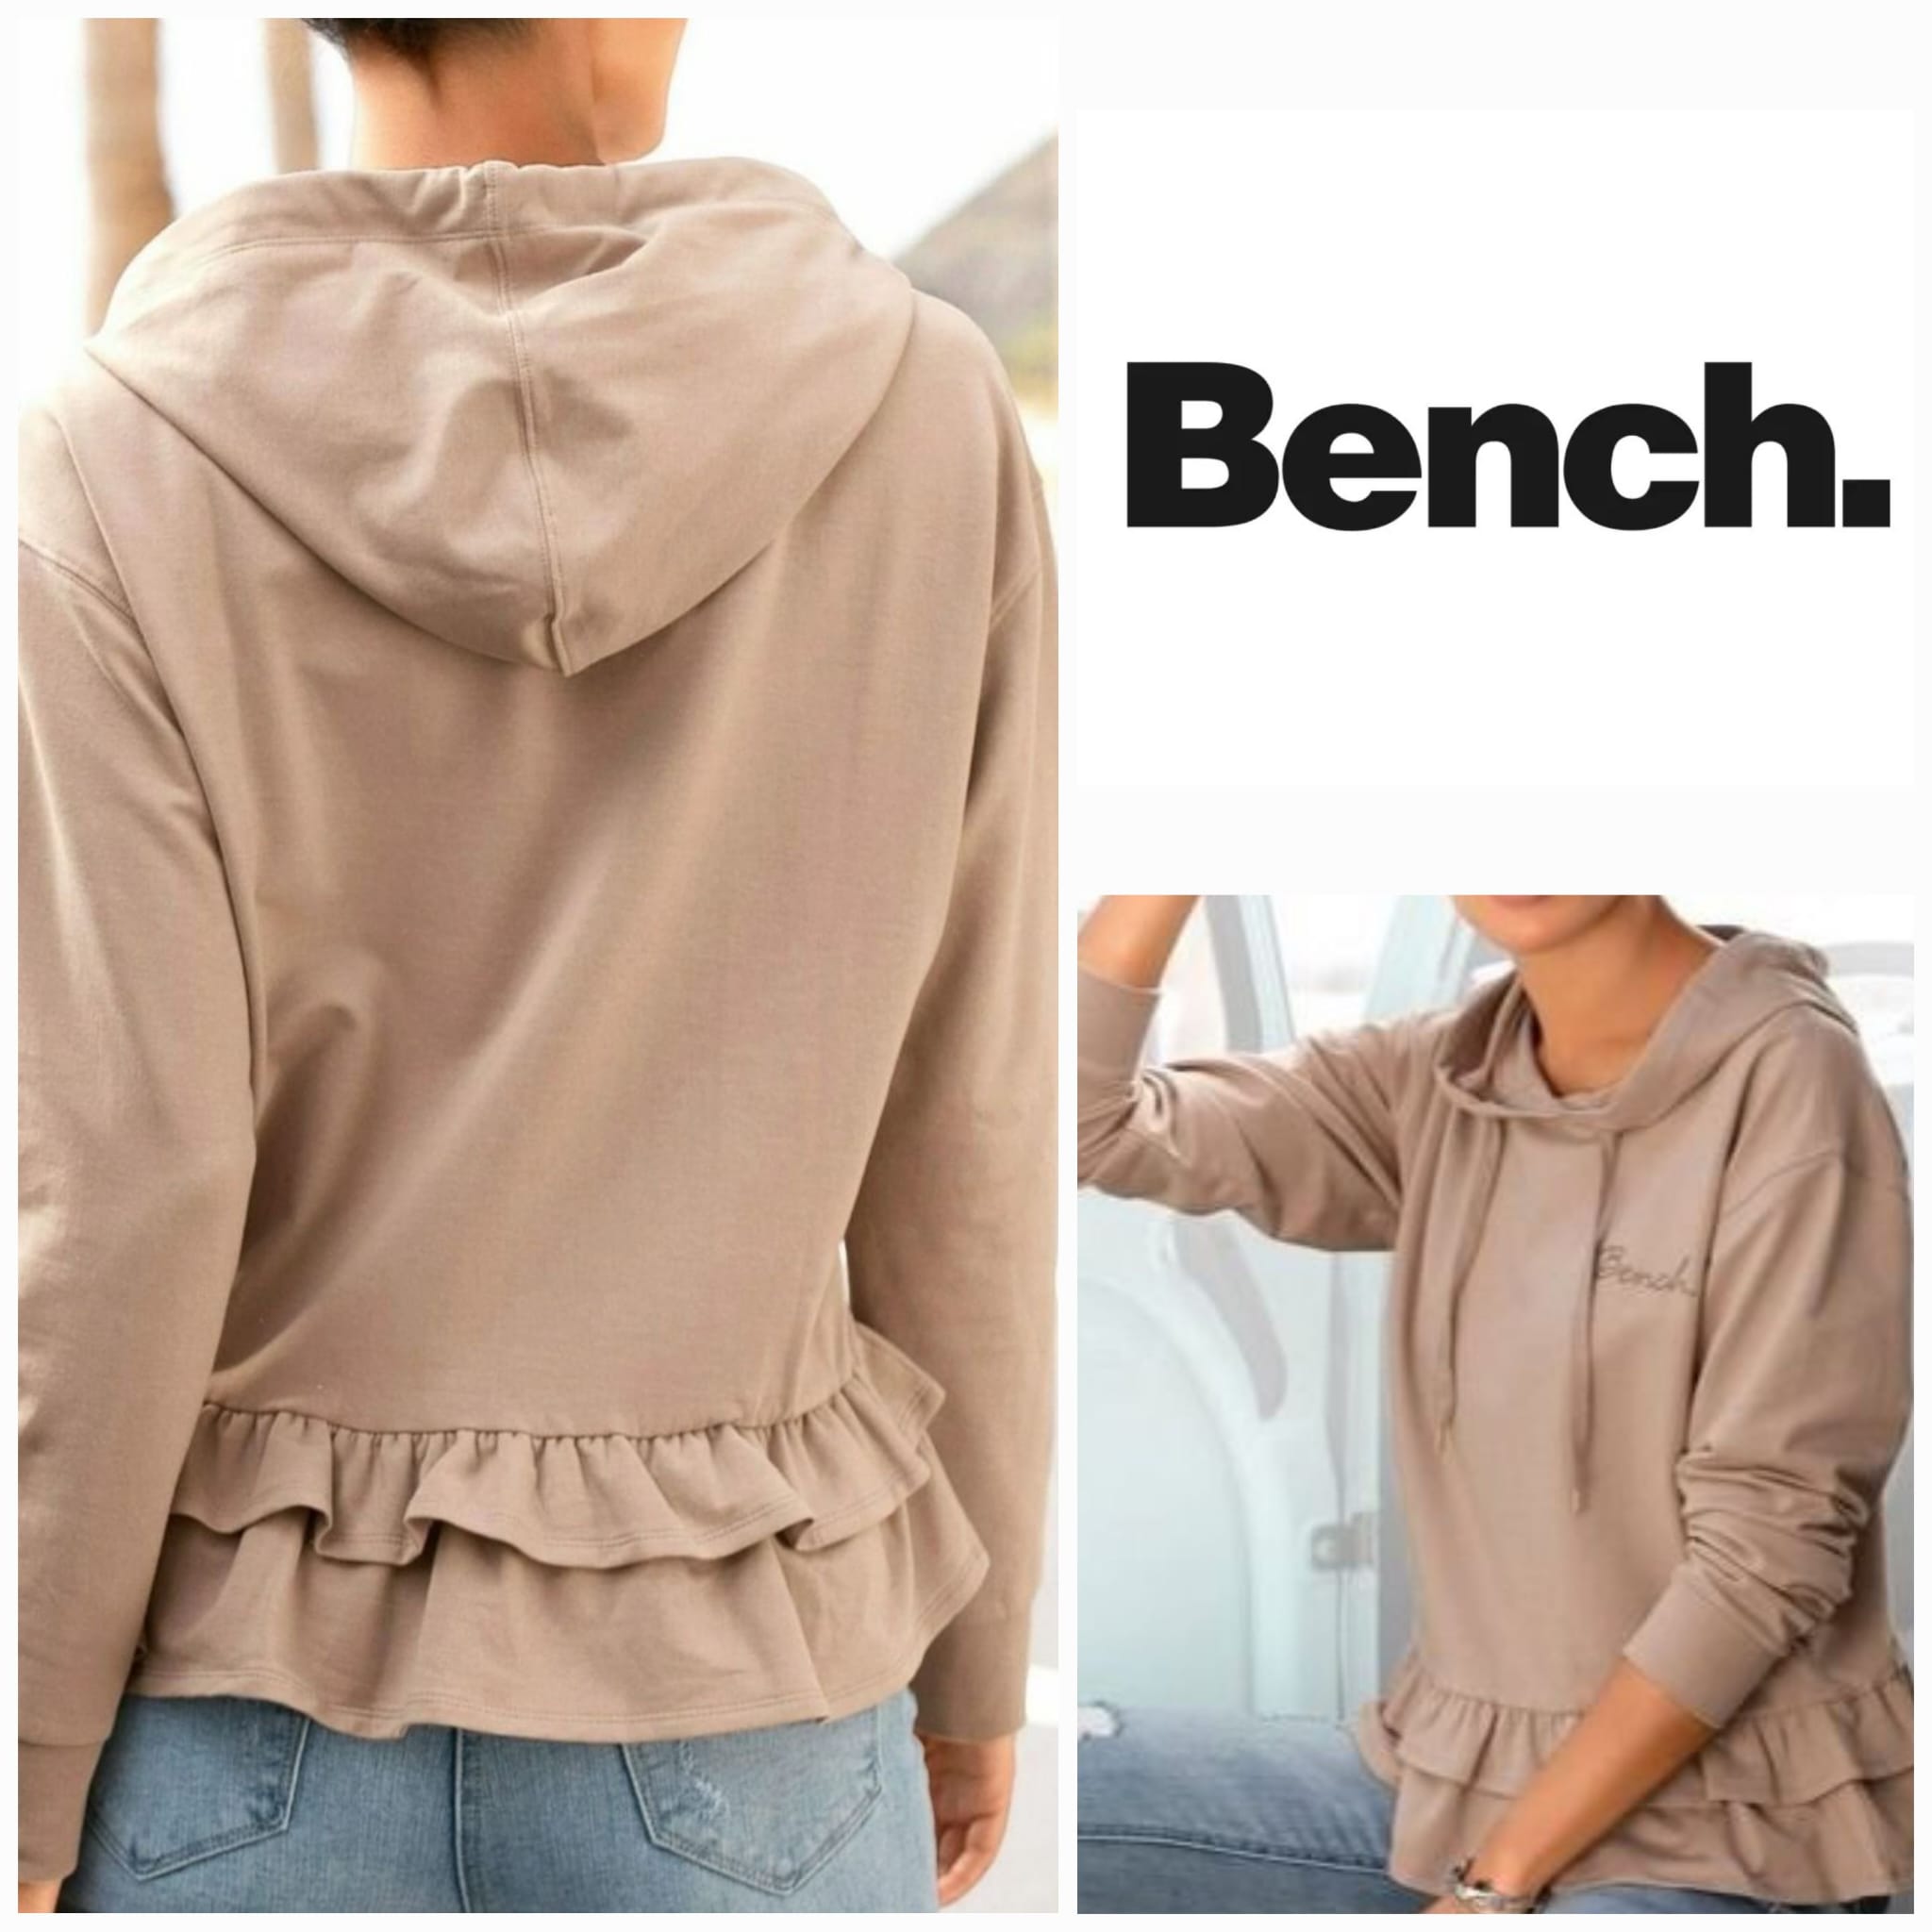 Women's hoodies with flounces from Bench